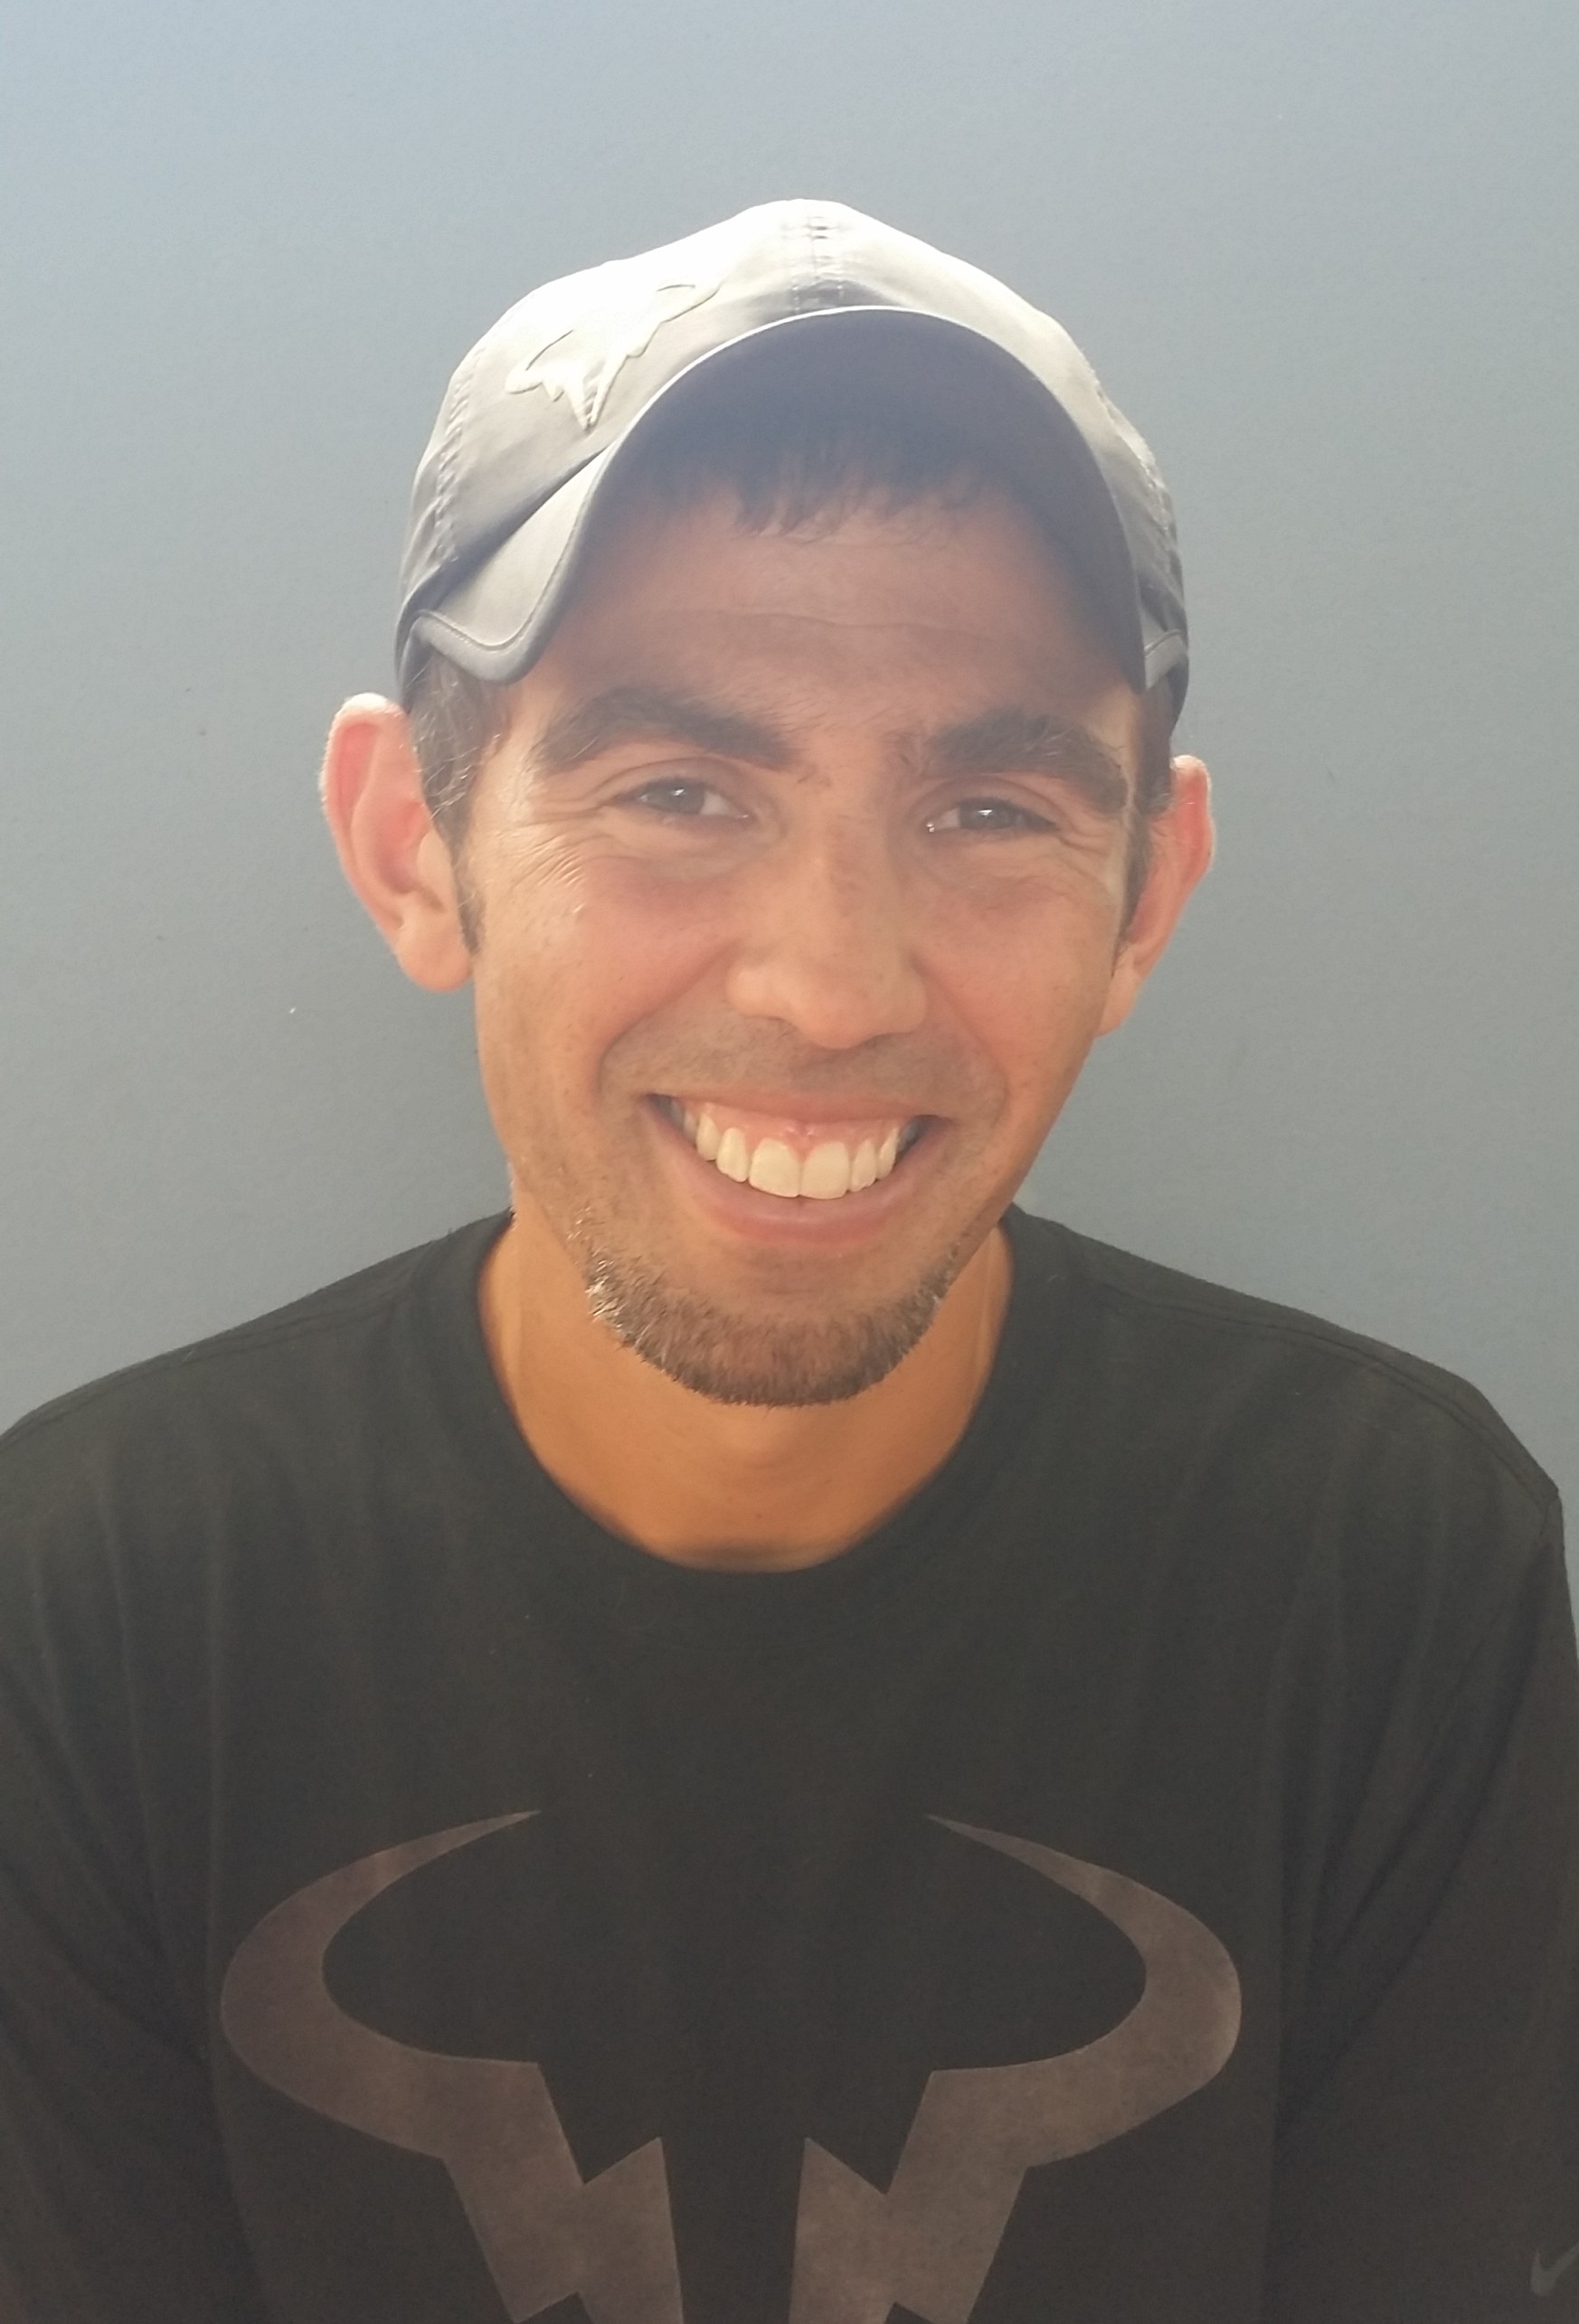 A long-time TCA member, Alex grew up playing at the club and was thrilled to join the team in January of 2014. As a coach, he has earned his USPTA ... - 20140814_121556-e1410367262217